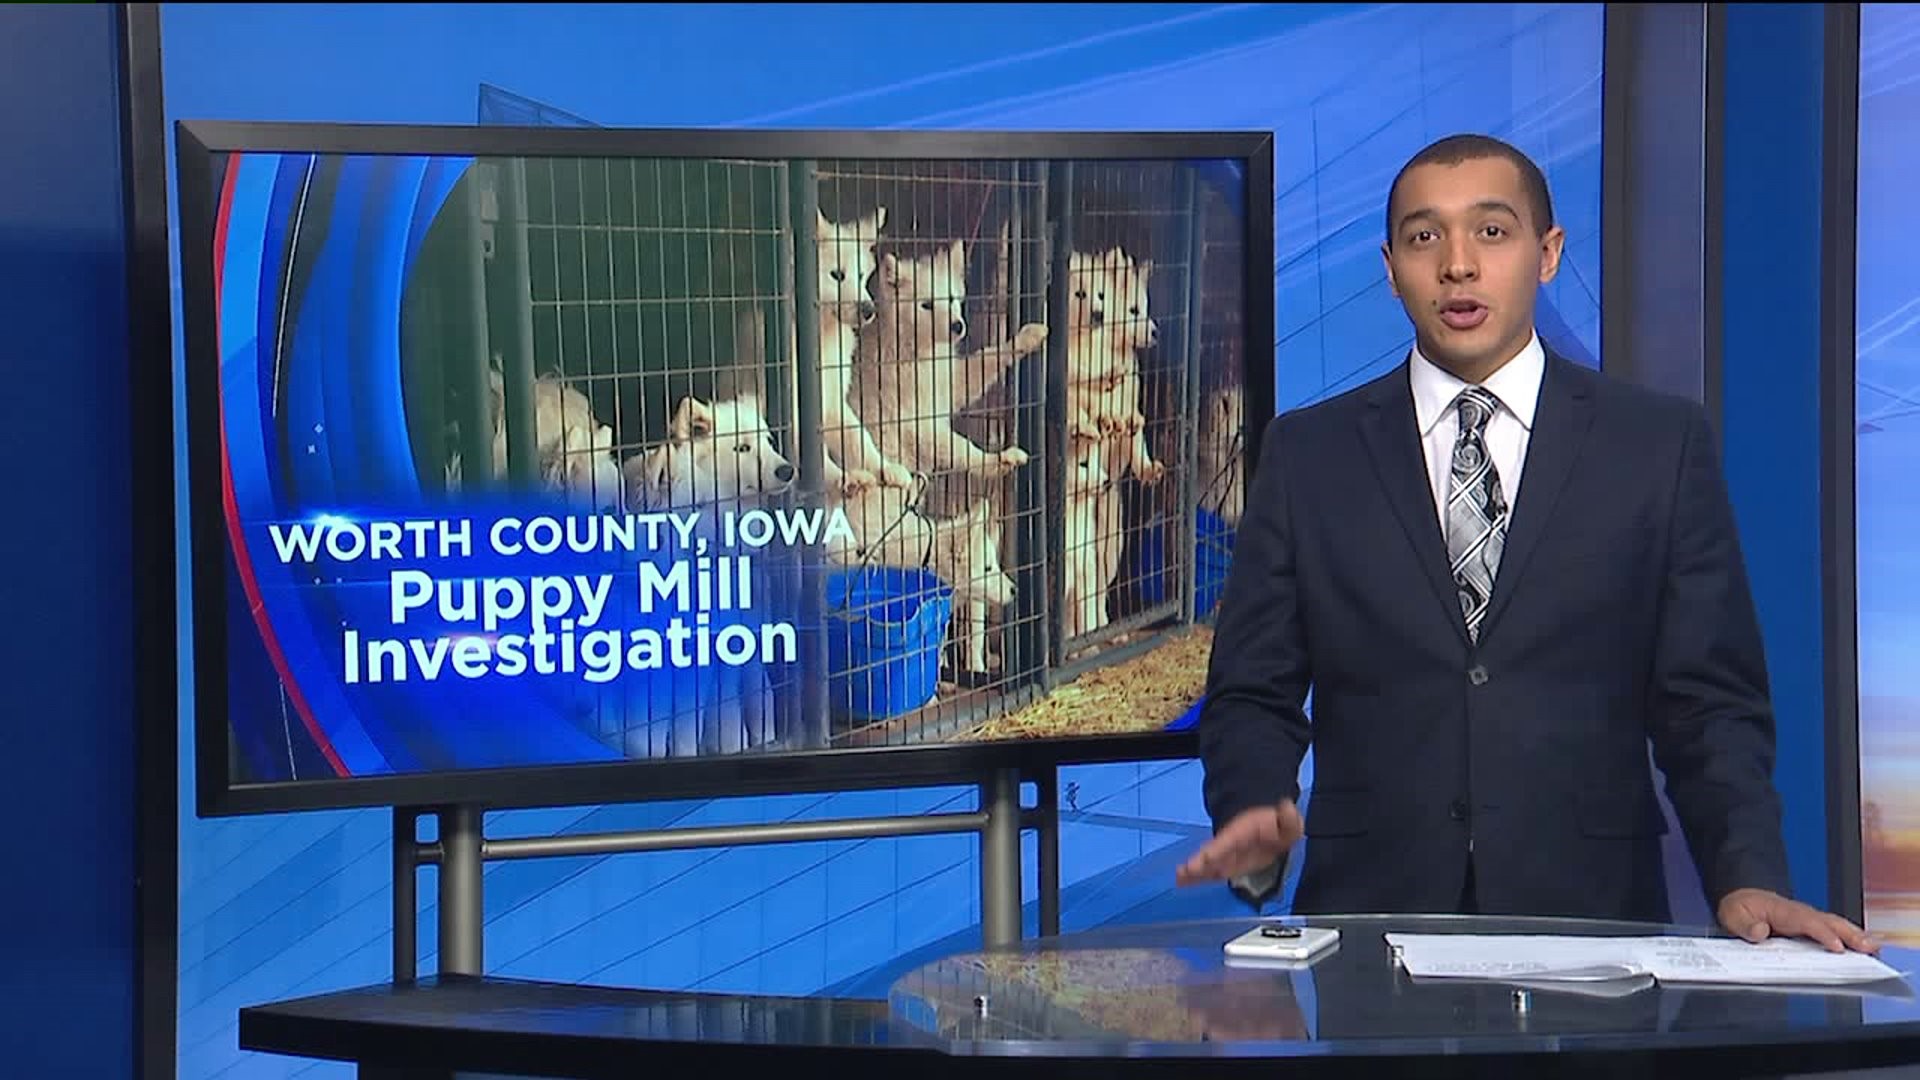 How local experts will get involved after puppy mill rescue